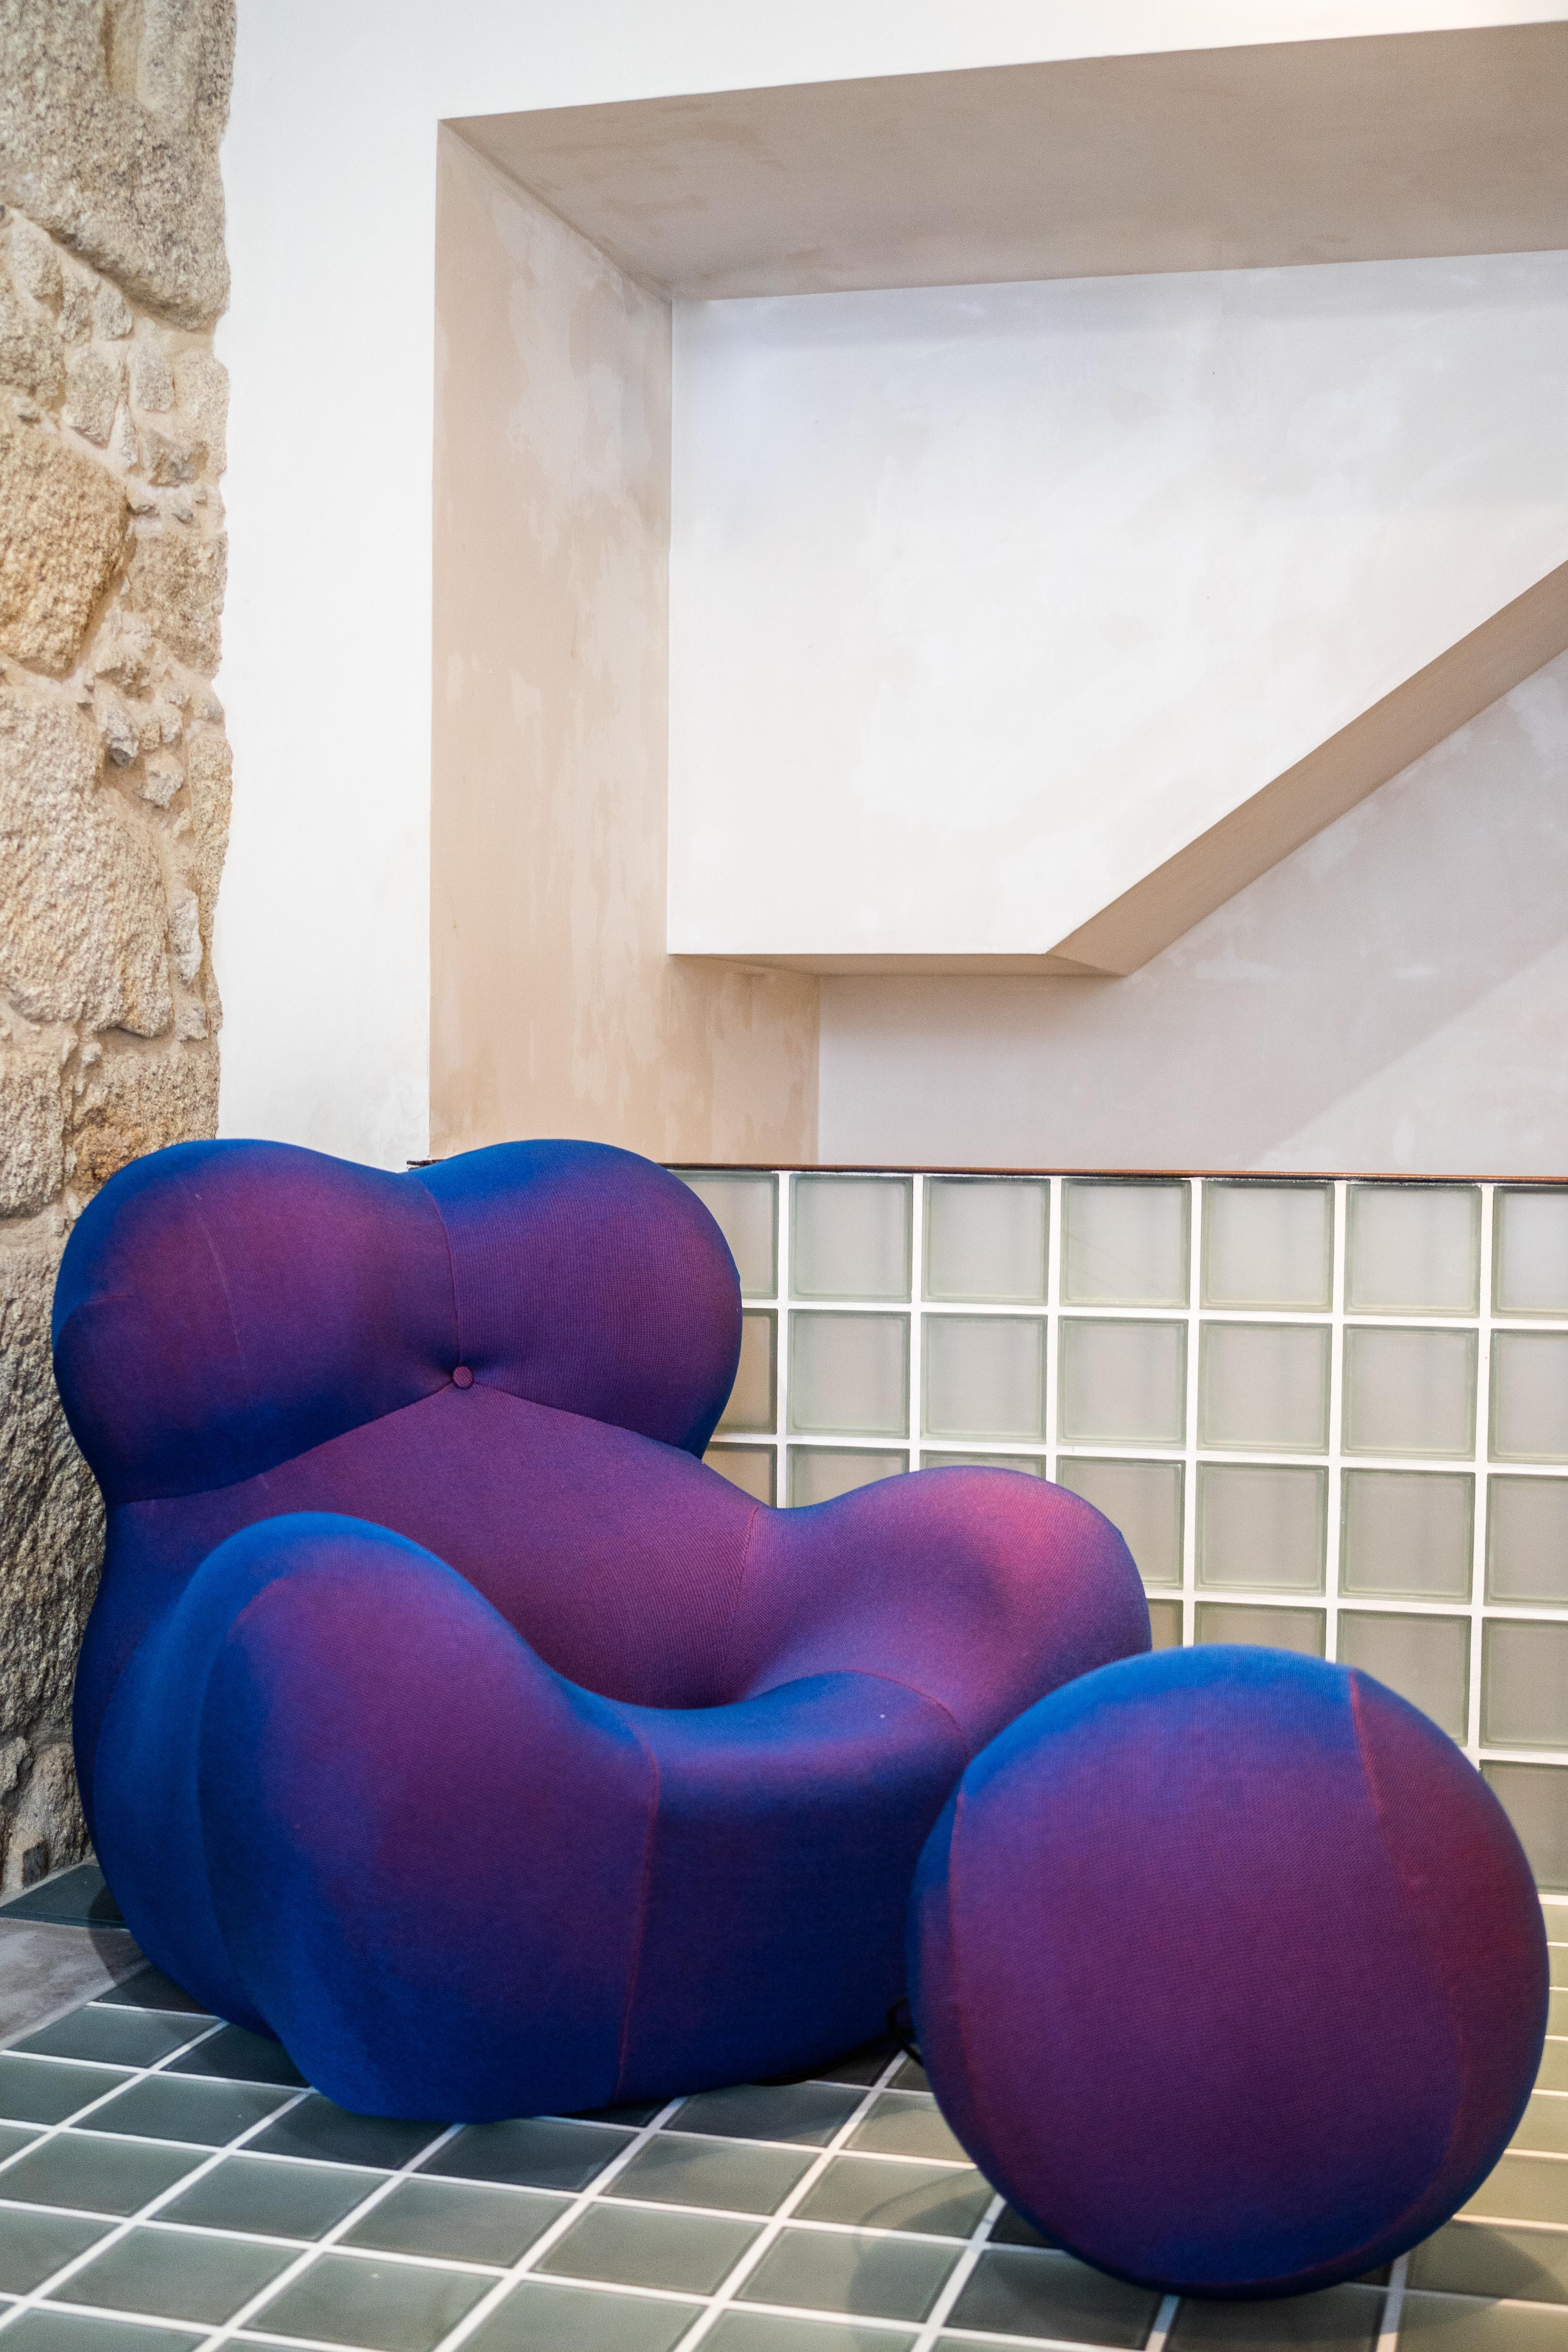 The Big Mama chair and ottoman designed by Gaetano Pesce in 1969 for B&B Italia. Up 2000 serie. 
The bulbous-shaped chair, with its connected ottoman, loosely resembles a silhouette of a well-endowed woman.
Exellent condition.
Beutiful violet